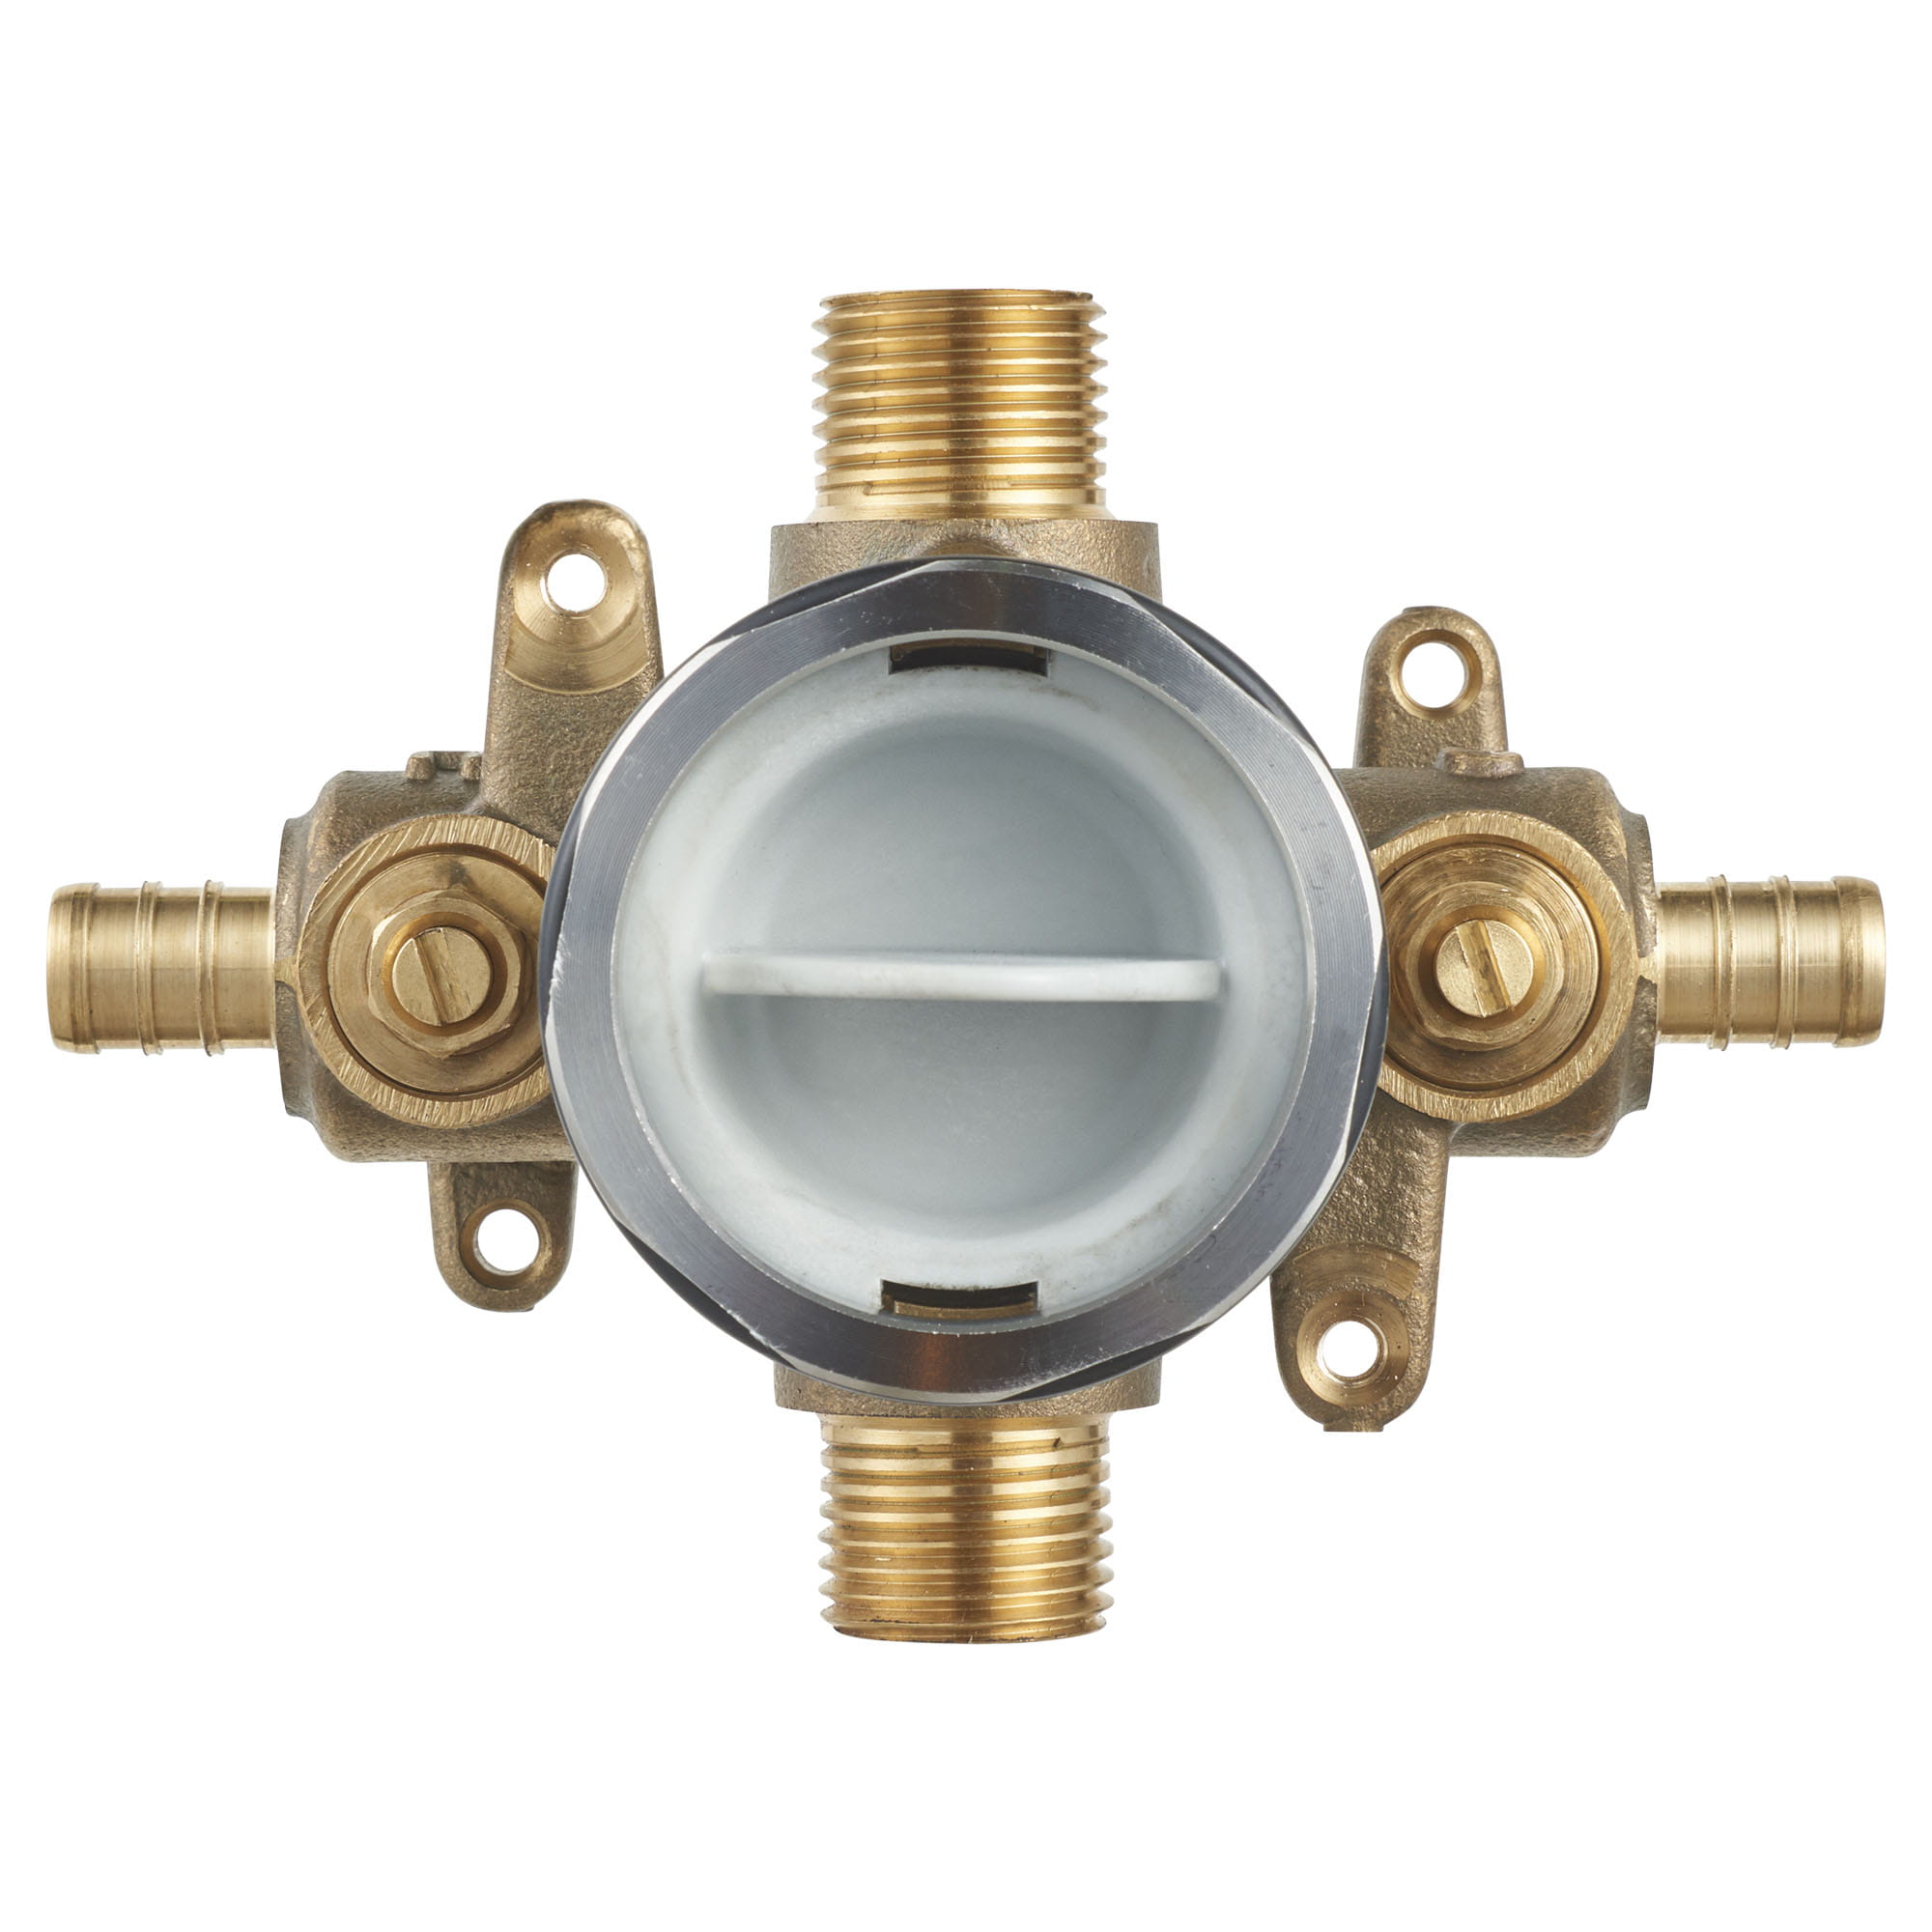 Flash® Shower Rough-In Valve With PEX Inlets/Universal Outlets With Screwdriver Stops for Crimp Ring System